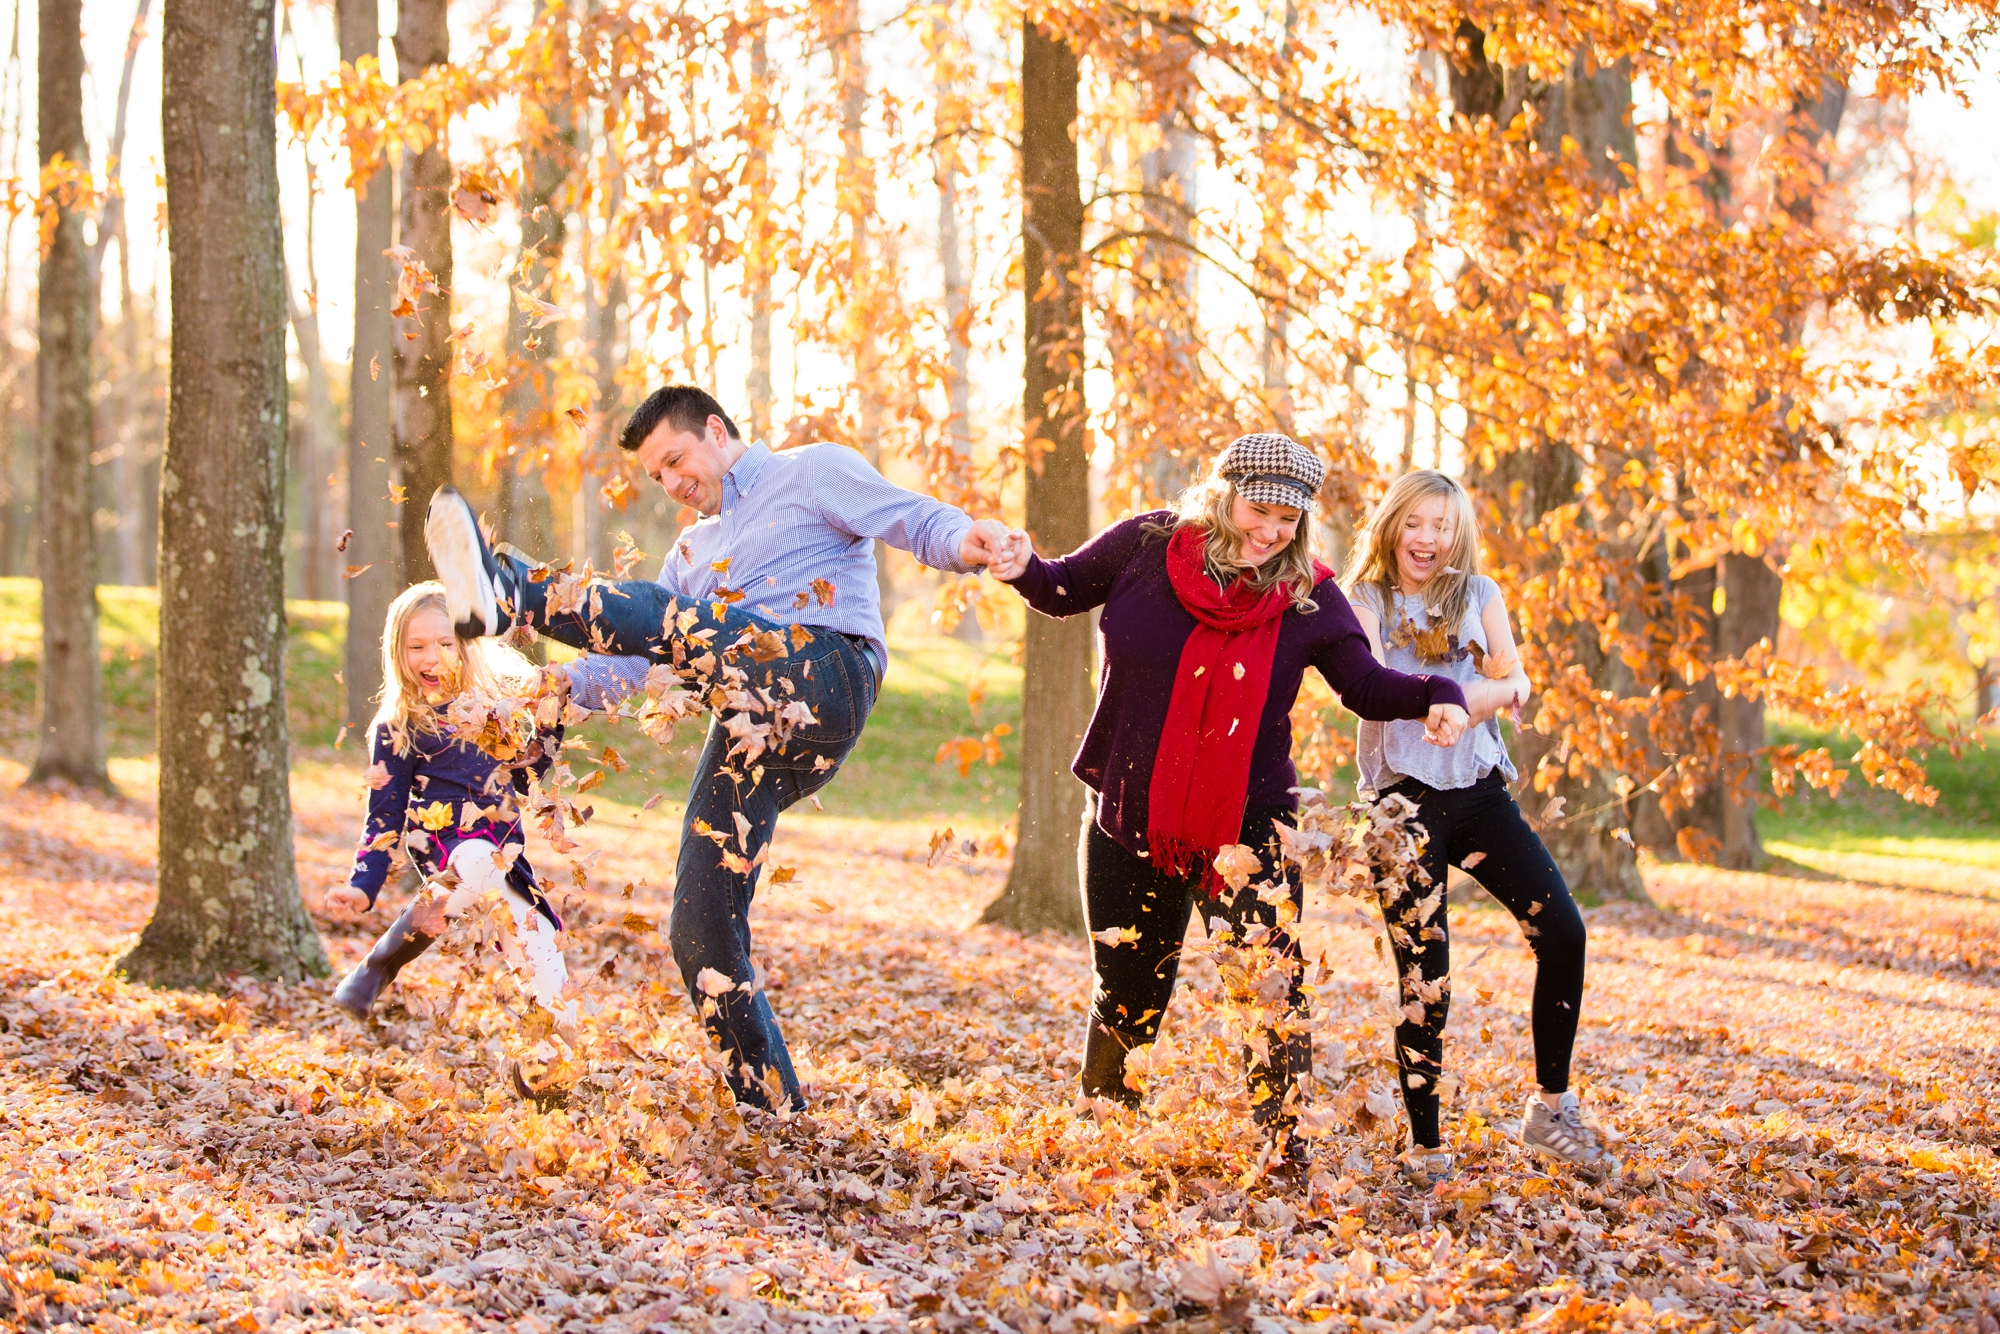 cranberry township family photographer, cranberry township family photos, cranberry township family photos, cranberry township family pictures, cranberry township family pics